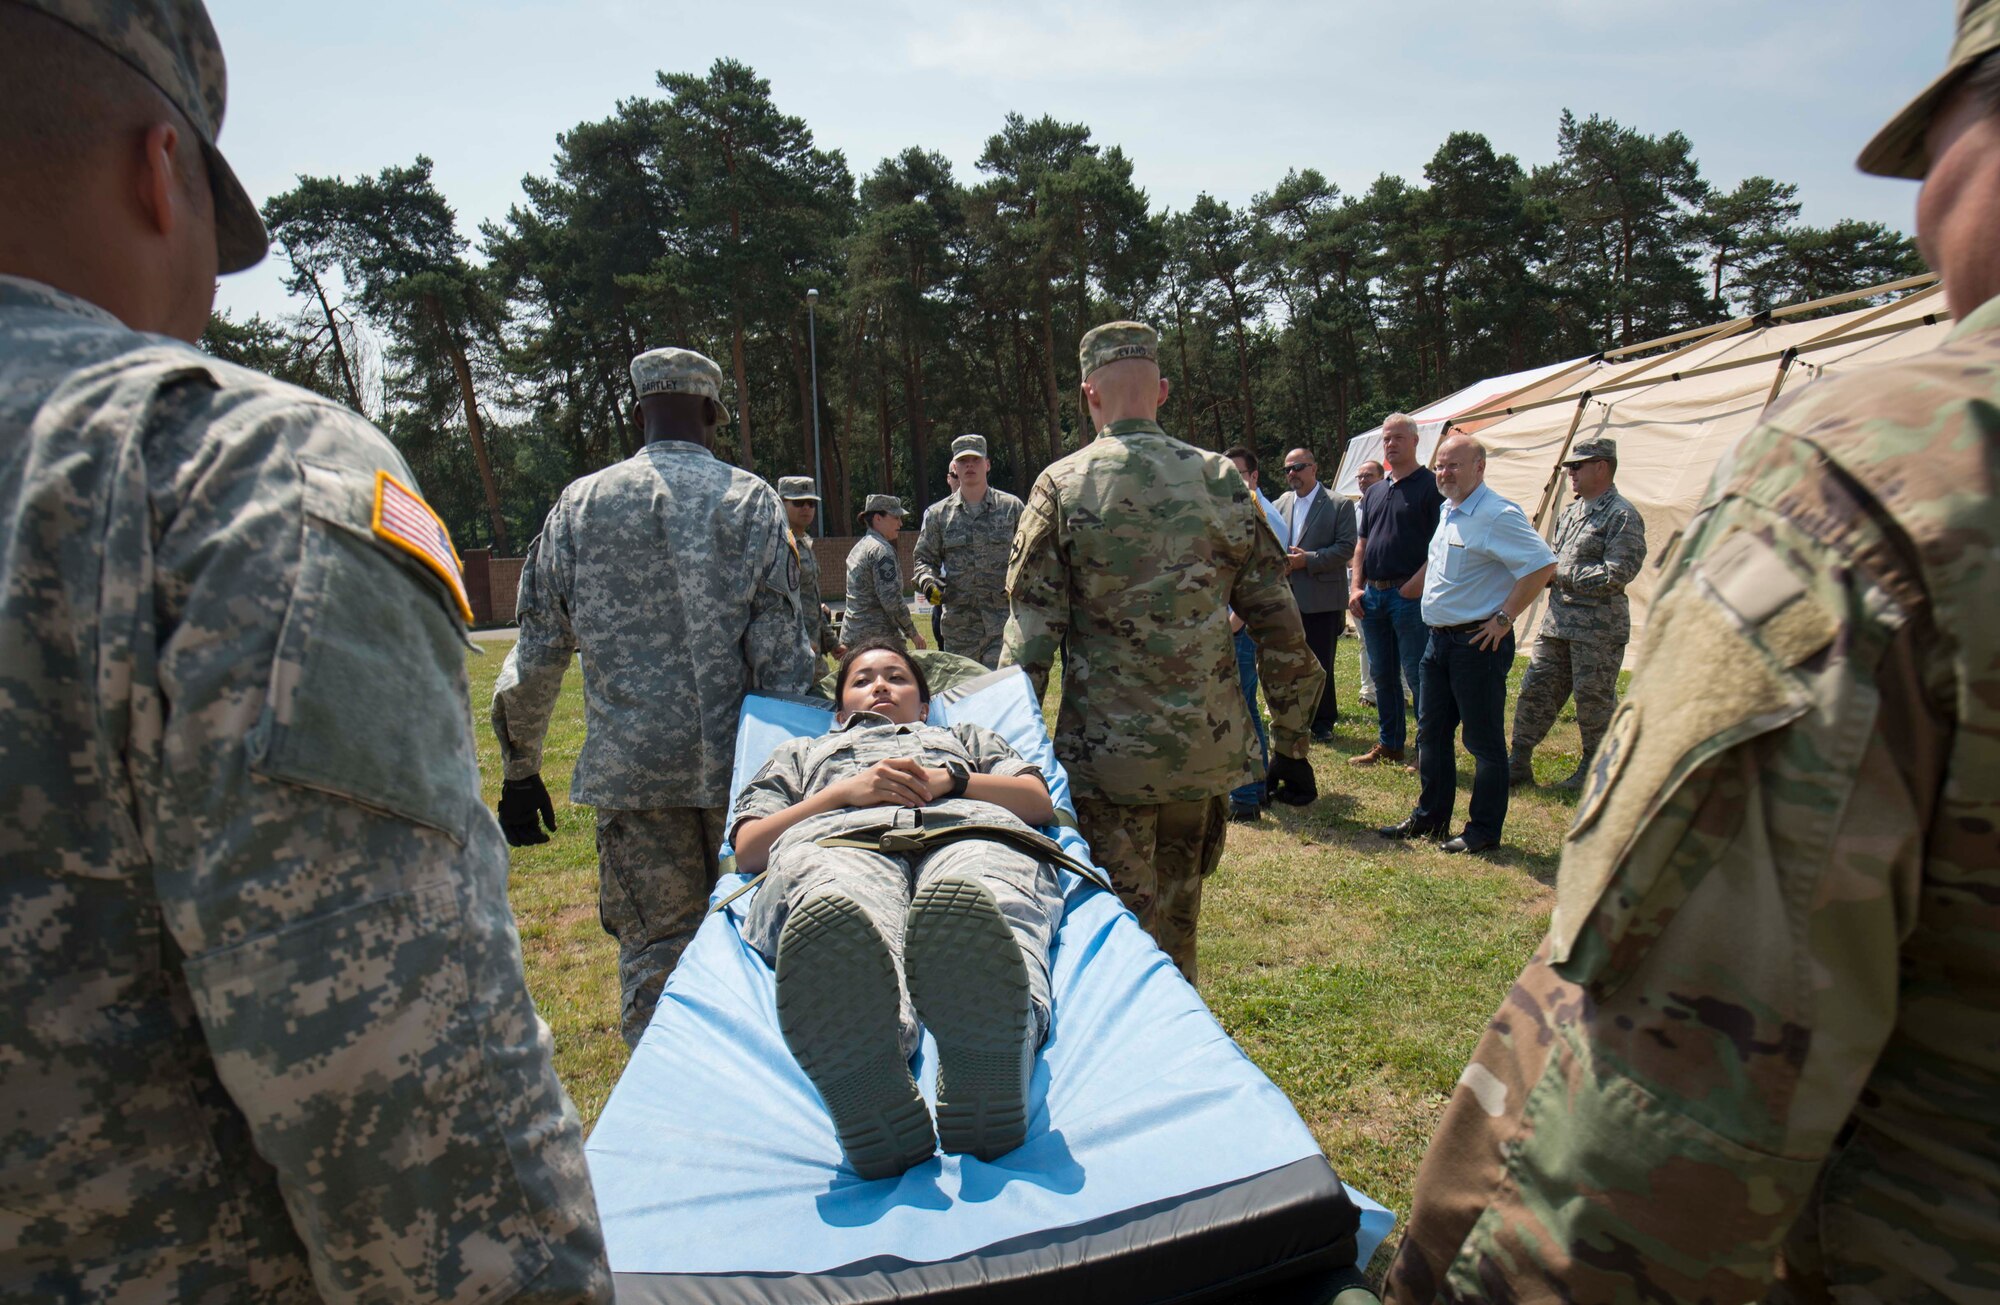 The 86th Medical Group, 345th Field Hospital, and 411th Hospital Center practice unloading a simulated patient from an ambulance during the 86th MDG's exercise Maroon Surge Community Outreach Day on Ramstein Air Base, Germany, June 7, 2018. Ramstein regularly welcomes community members to participate in tours and demonstrations to educate the public about Air Force capabilities, promote openness, and strengthen relations. (U.S. Air Force photo by Senior Airman Elizabeth Baker)